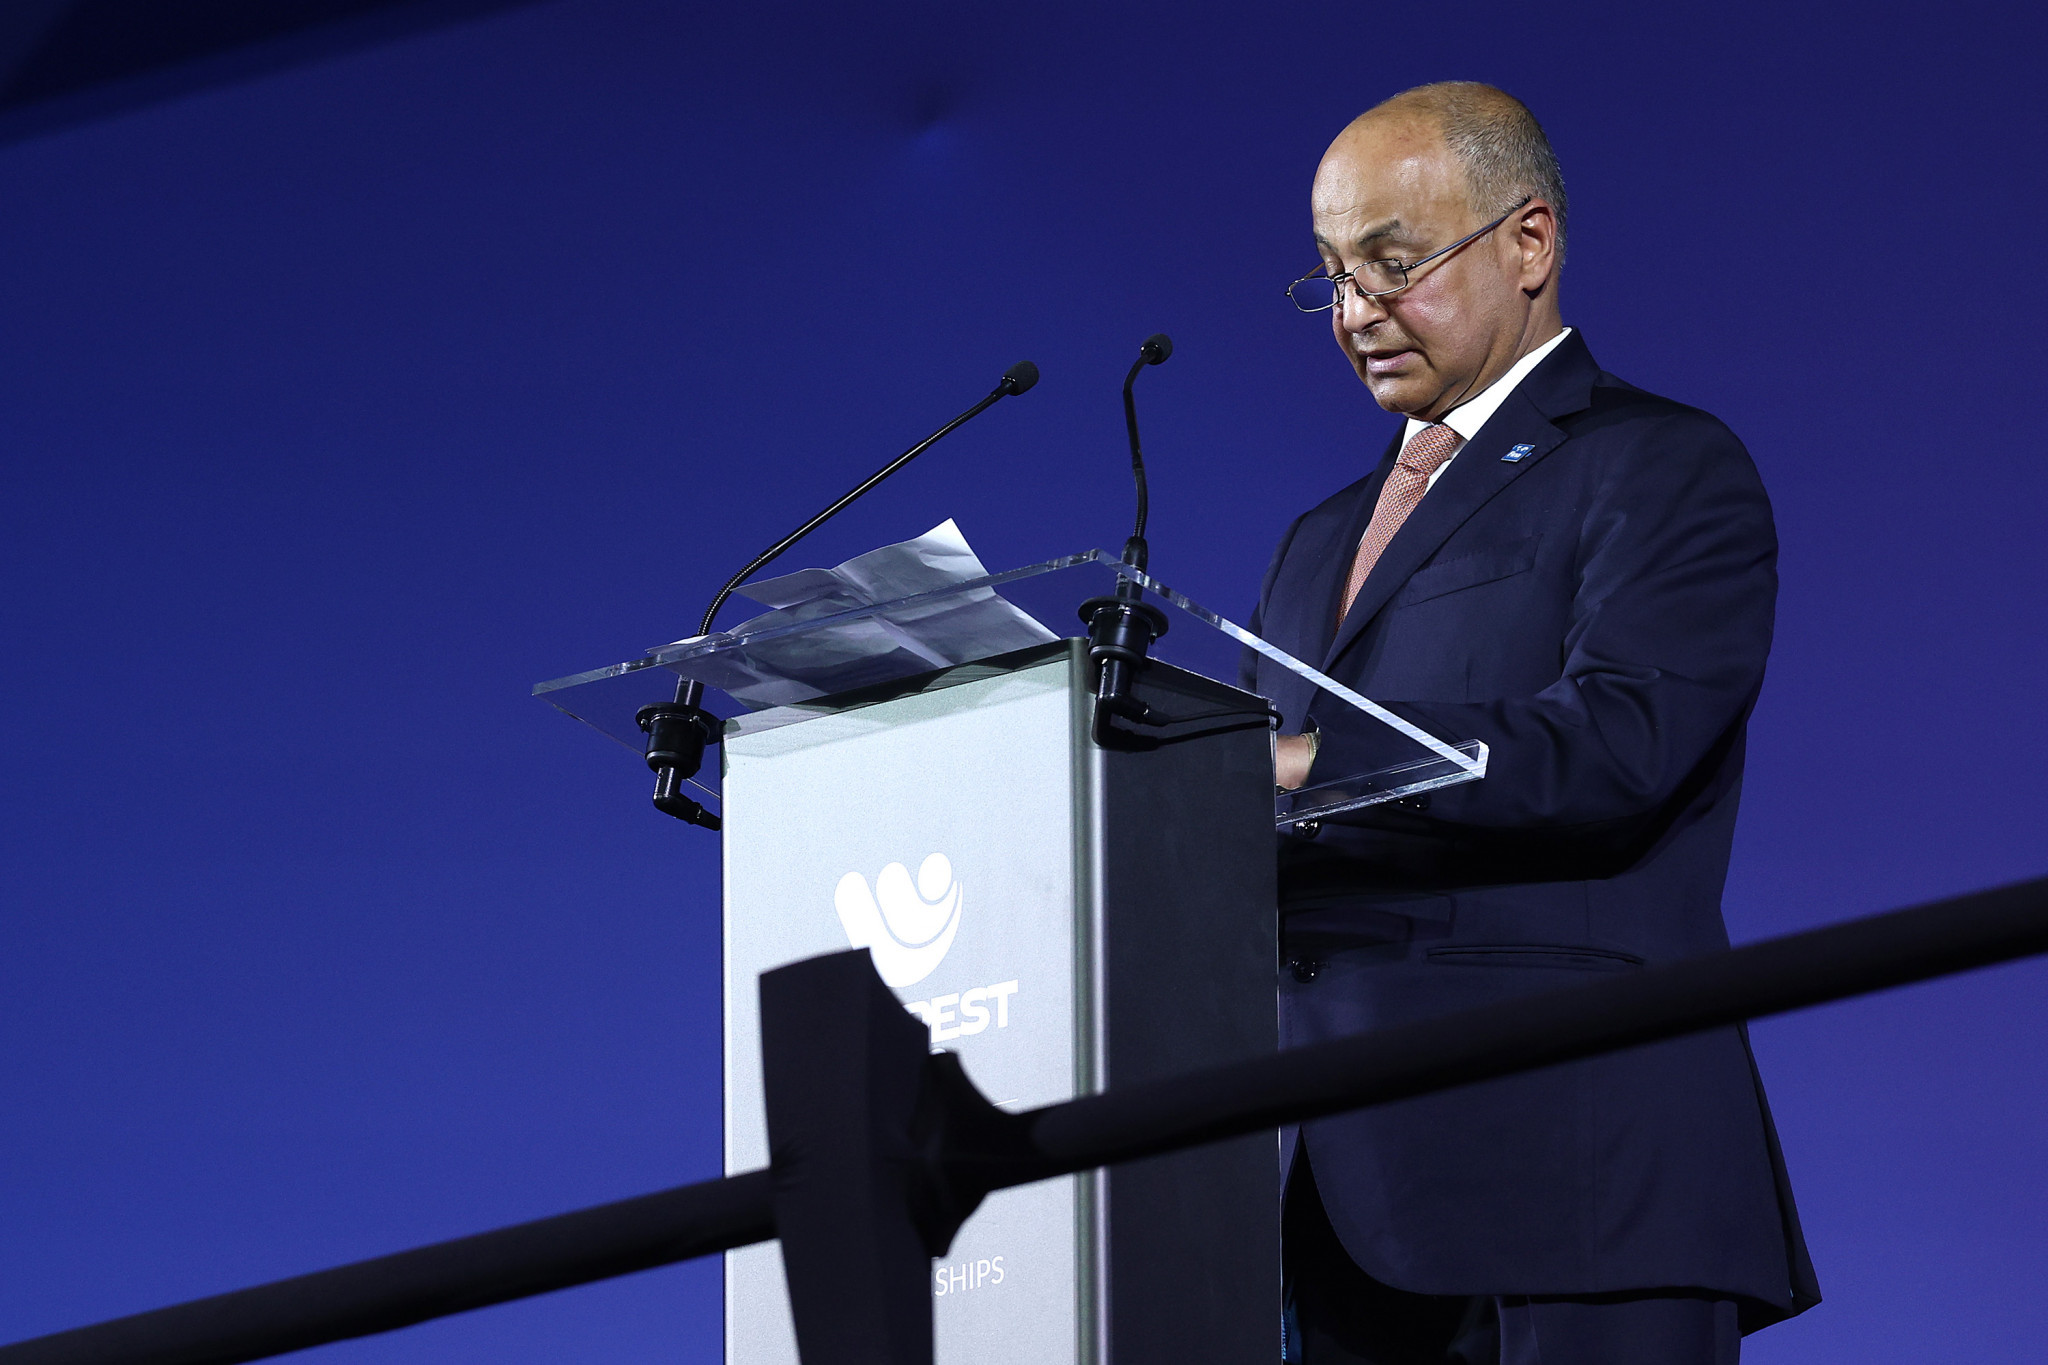 FINA President Al-Musallam declares Hungary "the perfect host" at World Championships Closing Ceremony